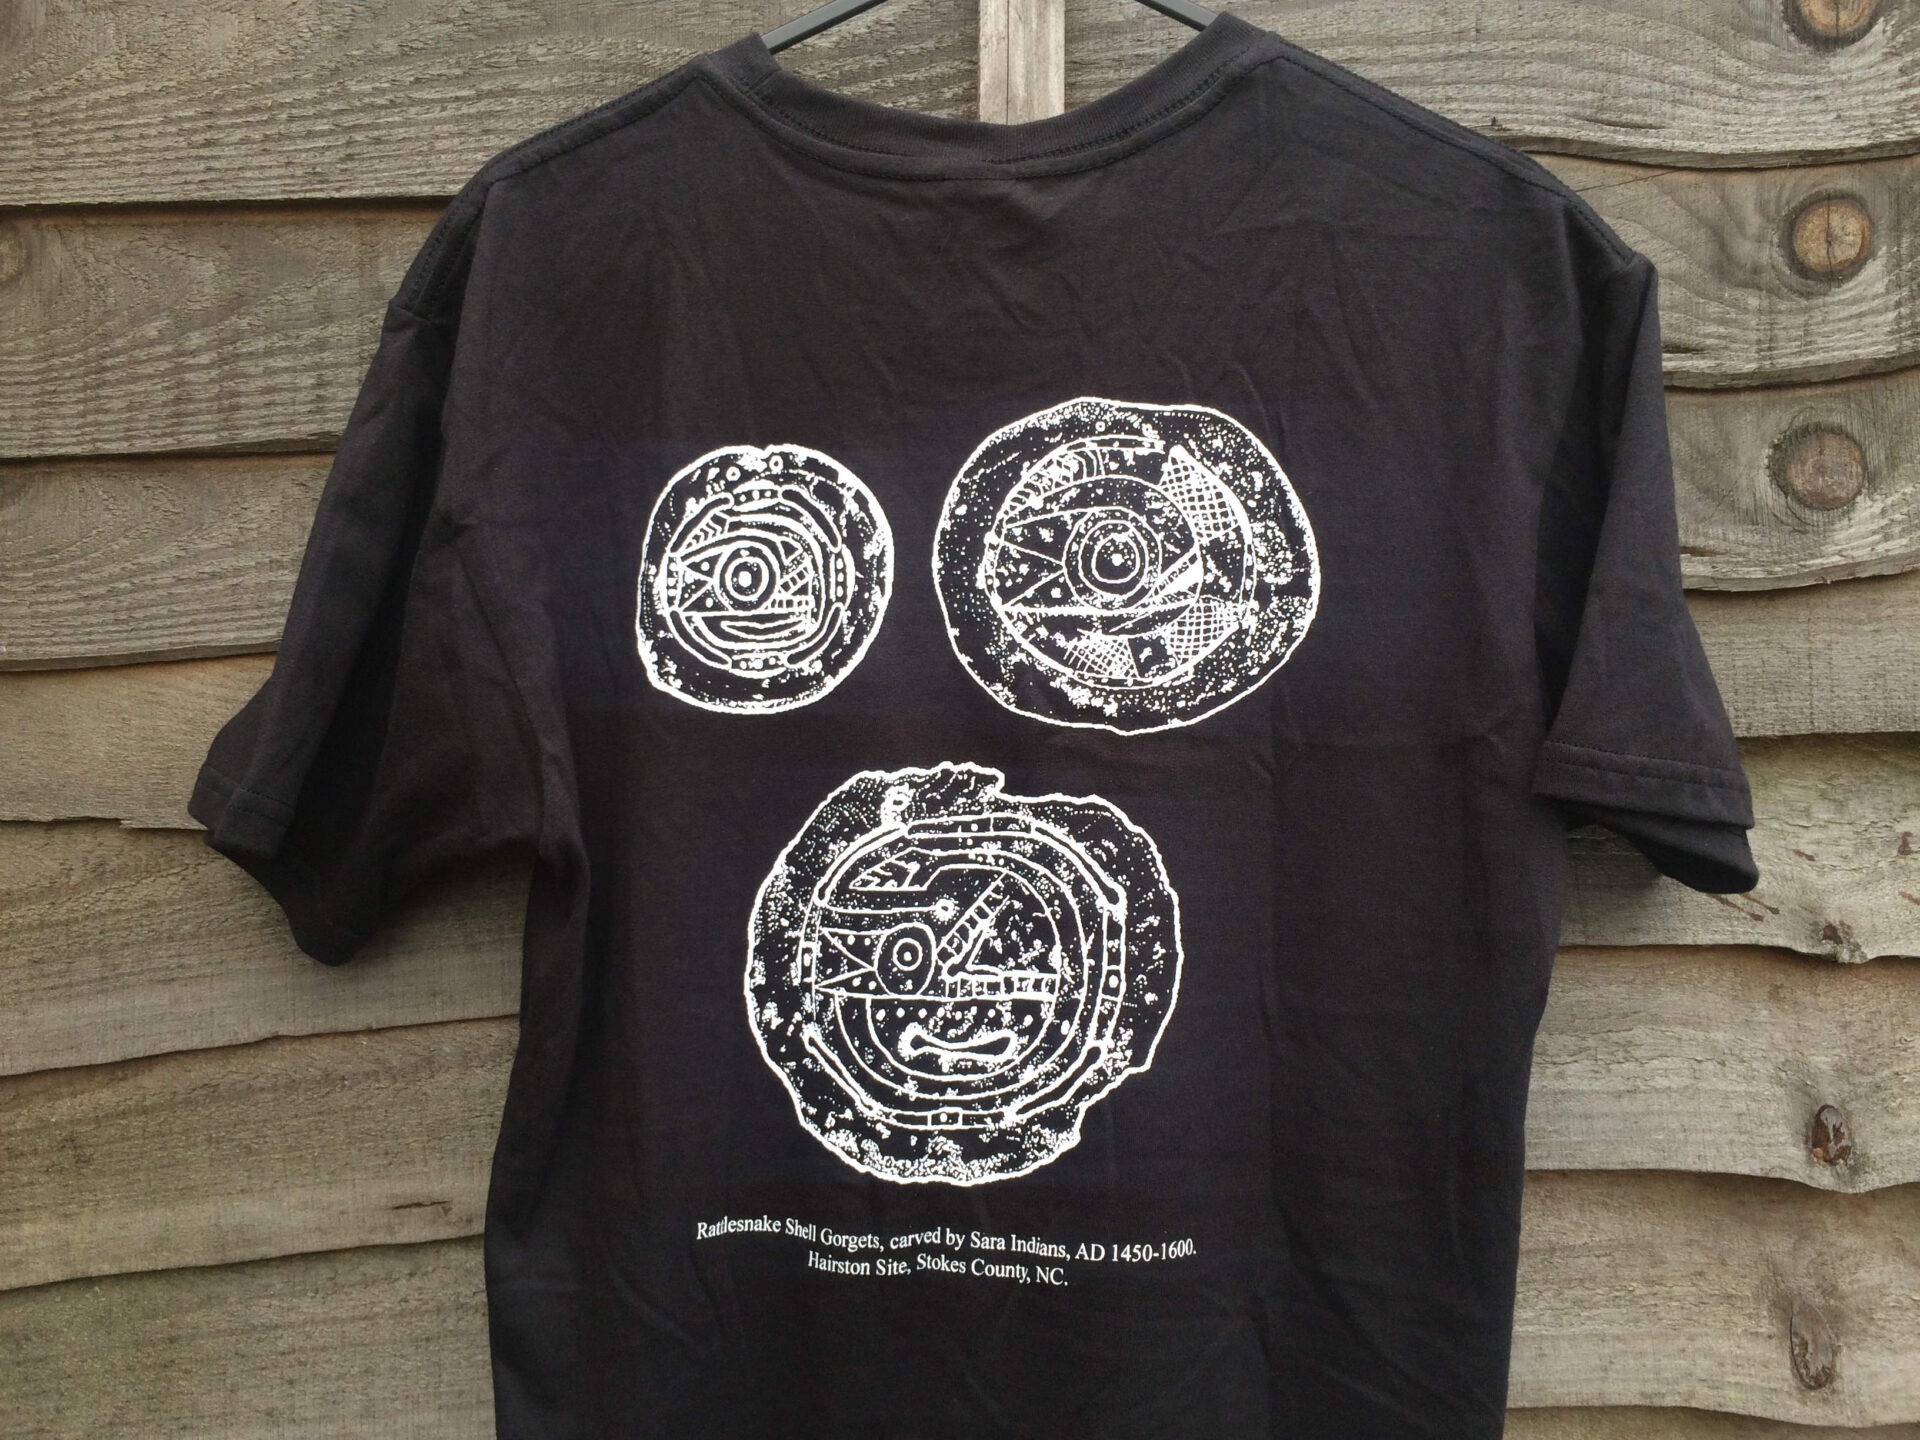 A black t-shirt with three white stipple drawings printed digitally of shell gorgets.